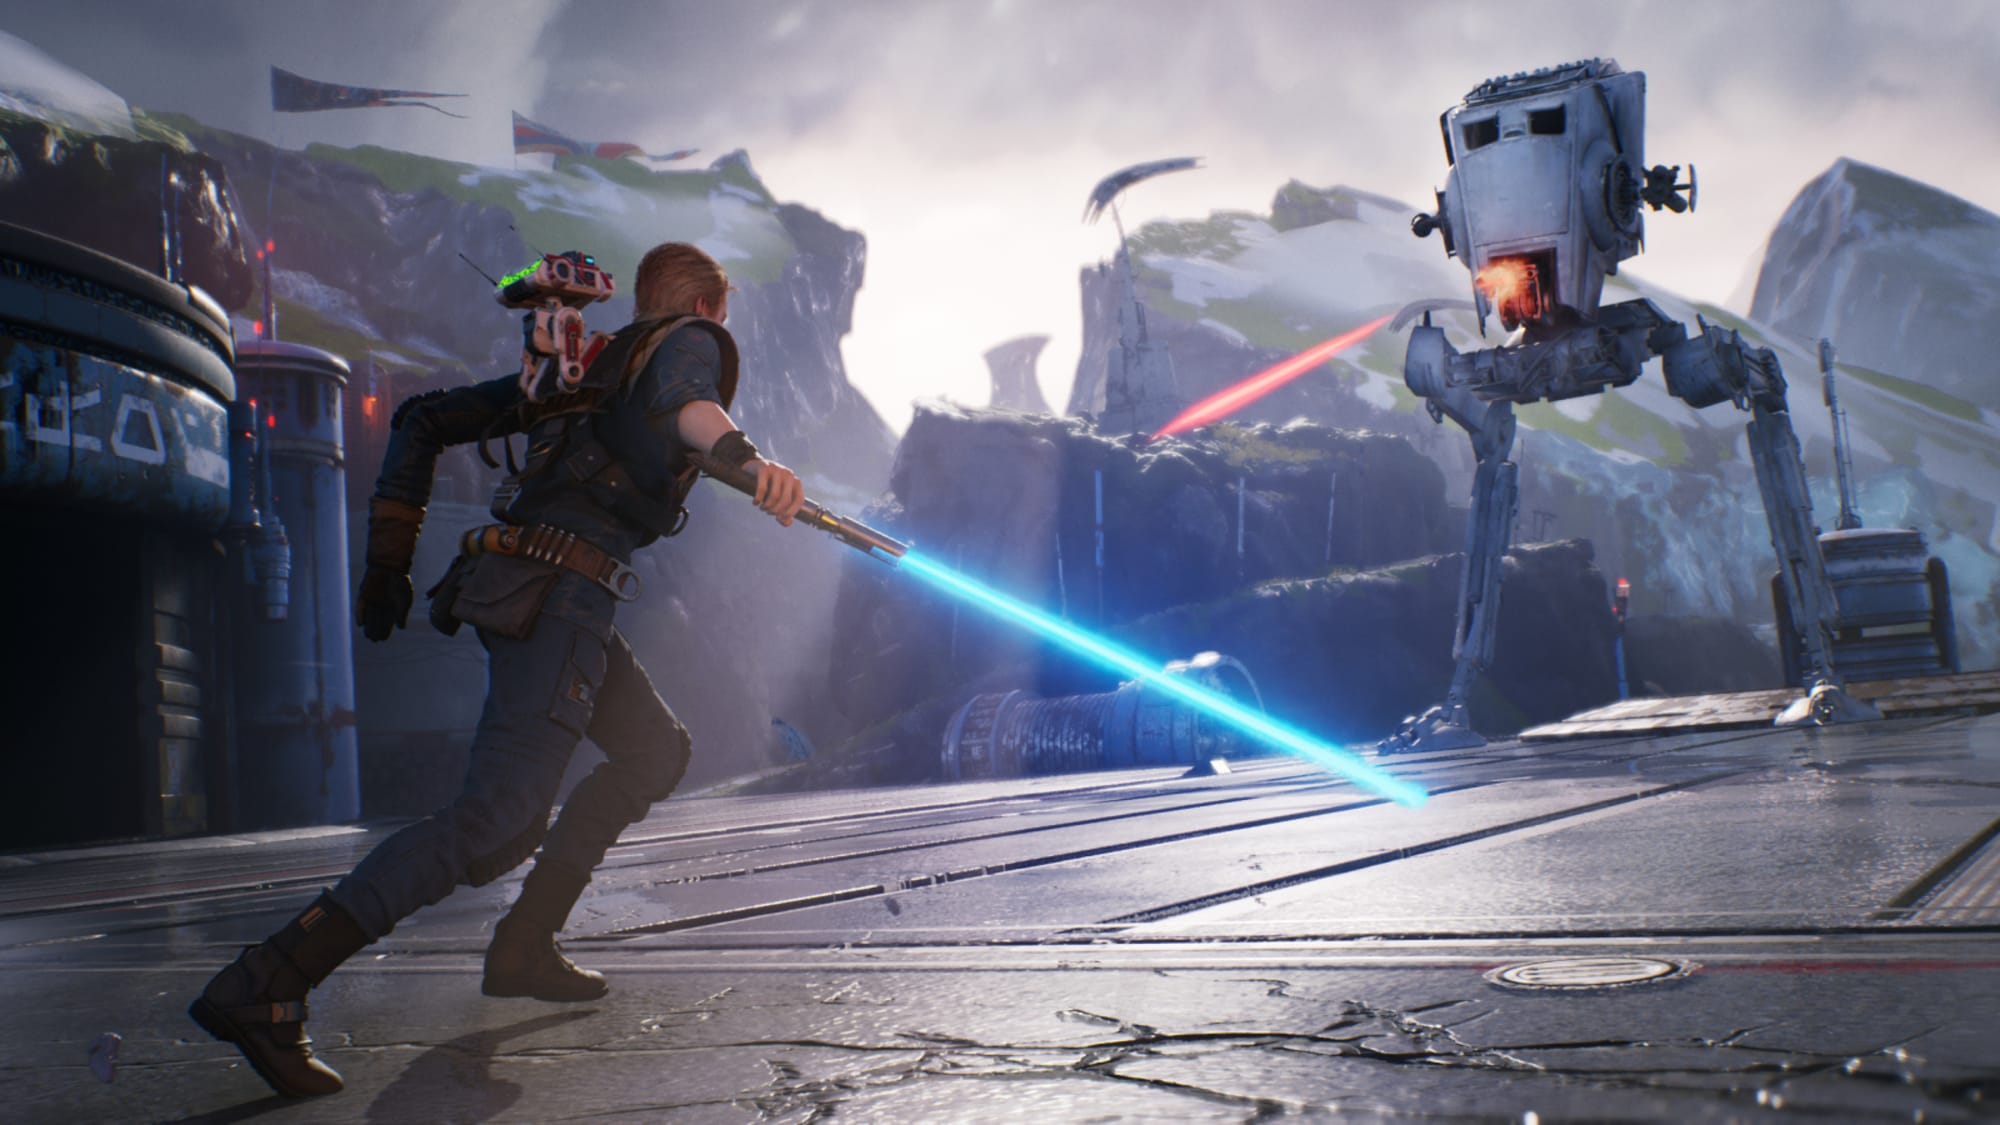 How EA turned its Star Wars games around in the knick of time